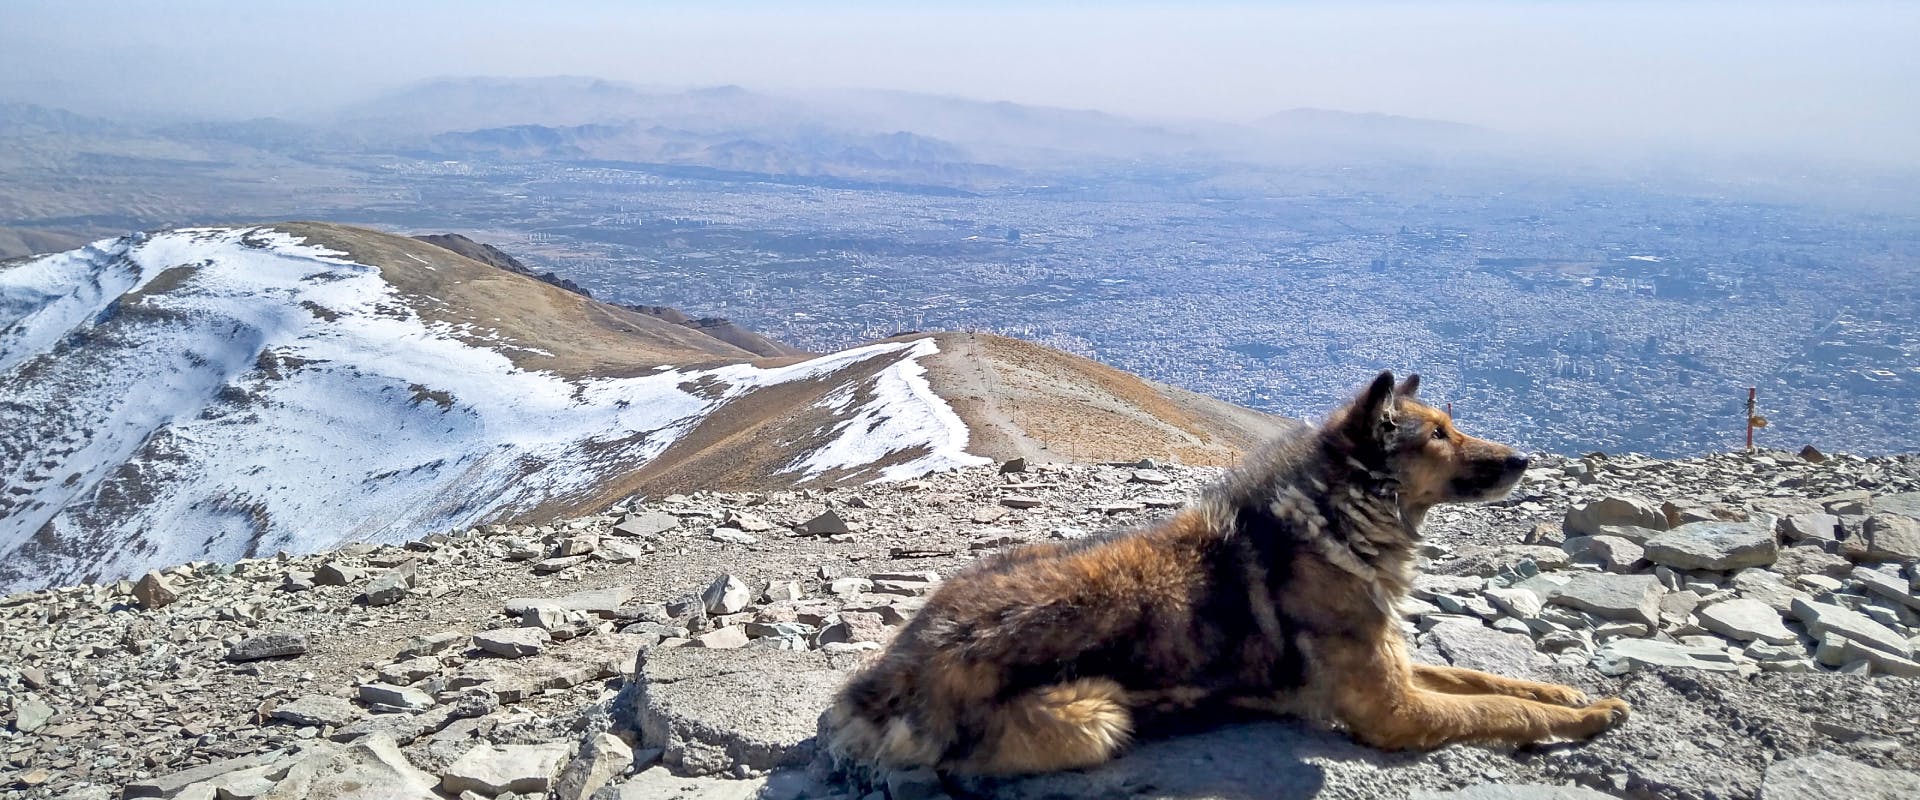 large fluffy dog sat on top of a mountain in iceland overlooking a mountain range view